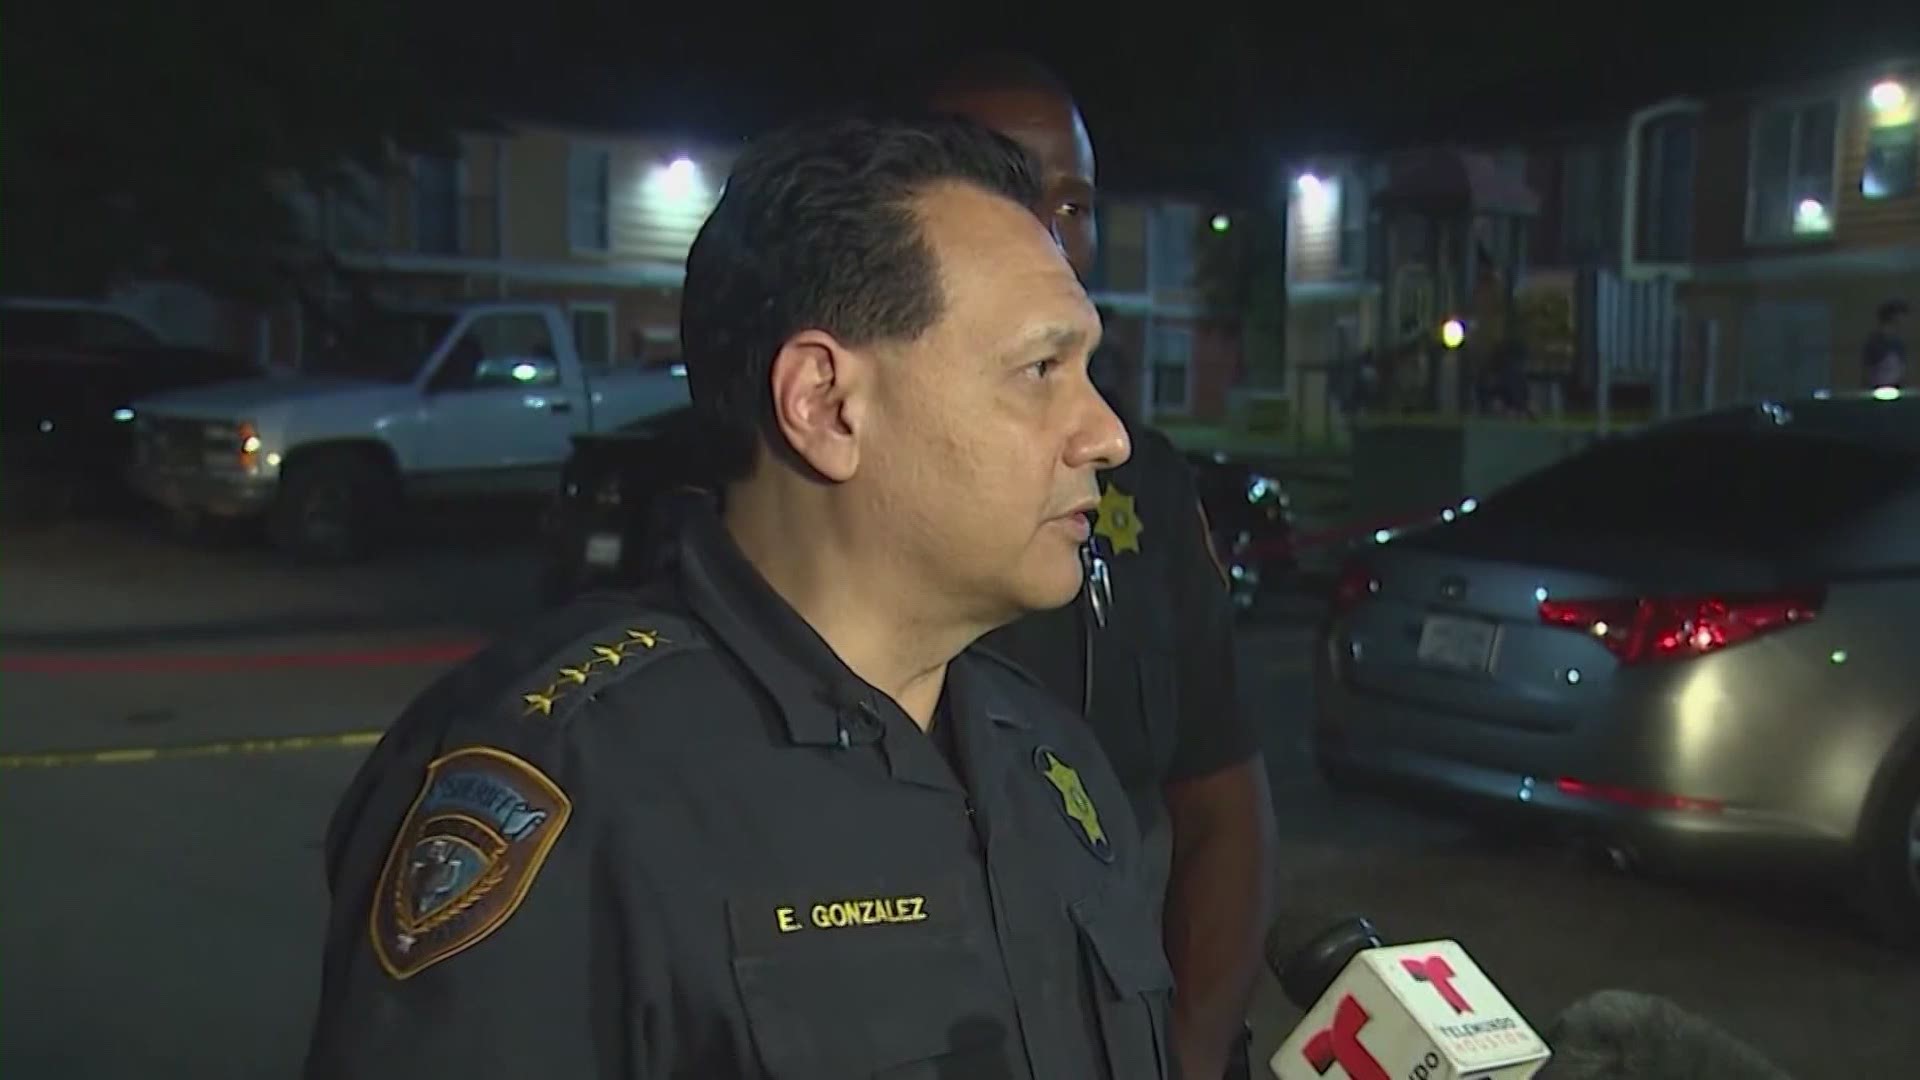 Acevedo, now the current Miami Police Chief, says leading ICE is one of the most difficult jobs in this political environment, and Gonzalez is the right pick.